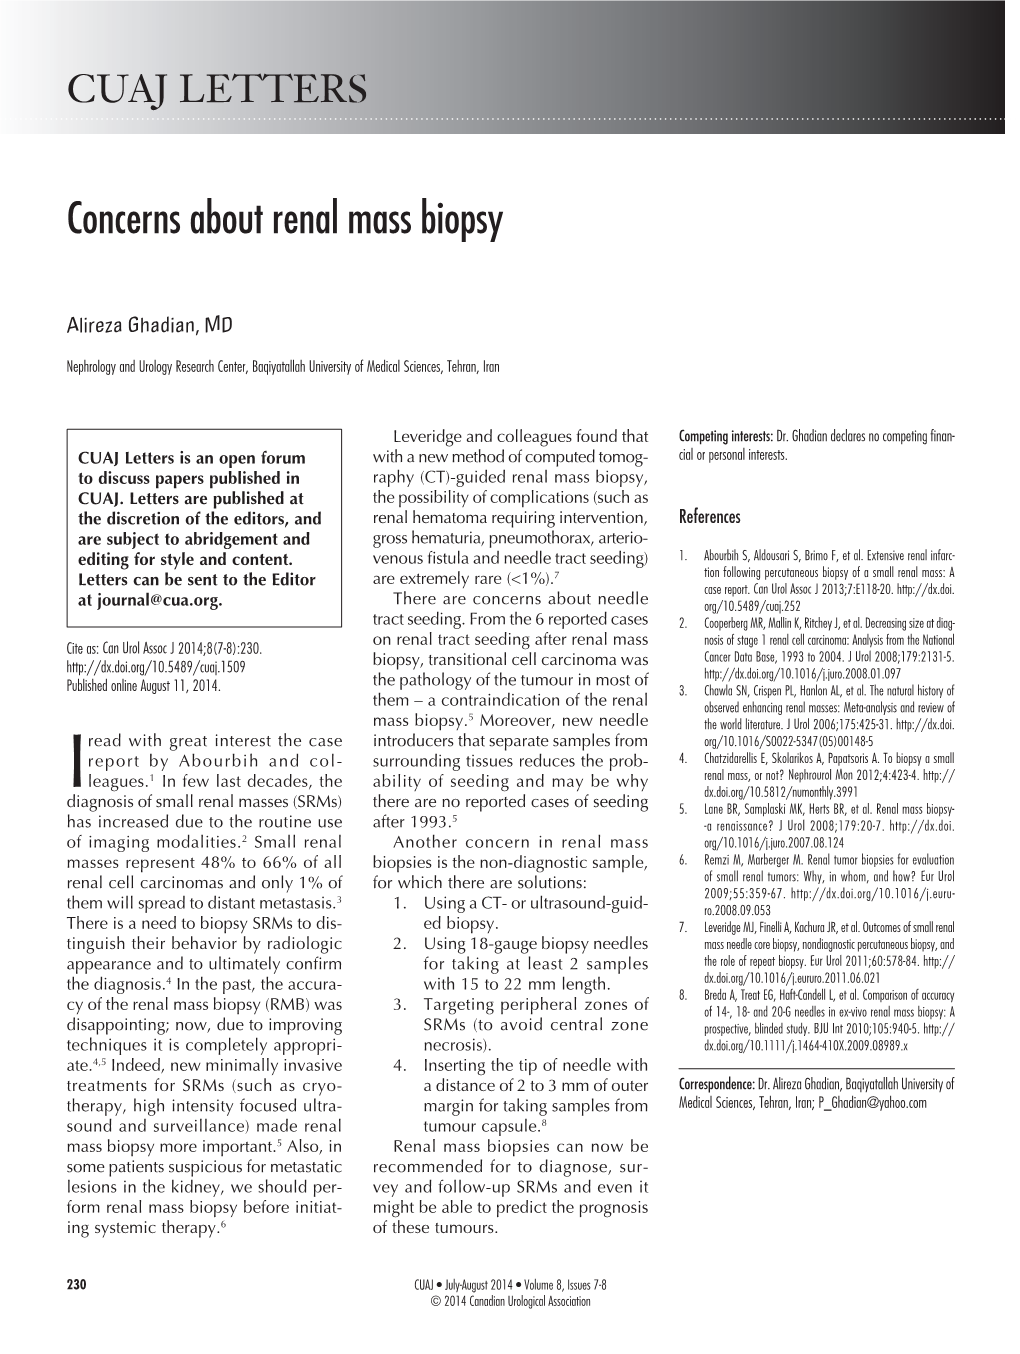 Concerns About Renal Mass Biopsy